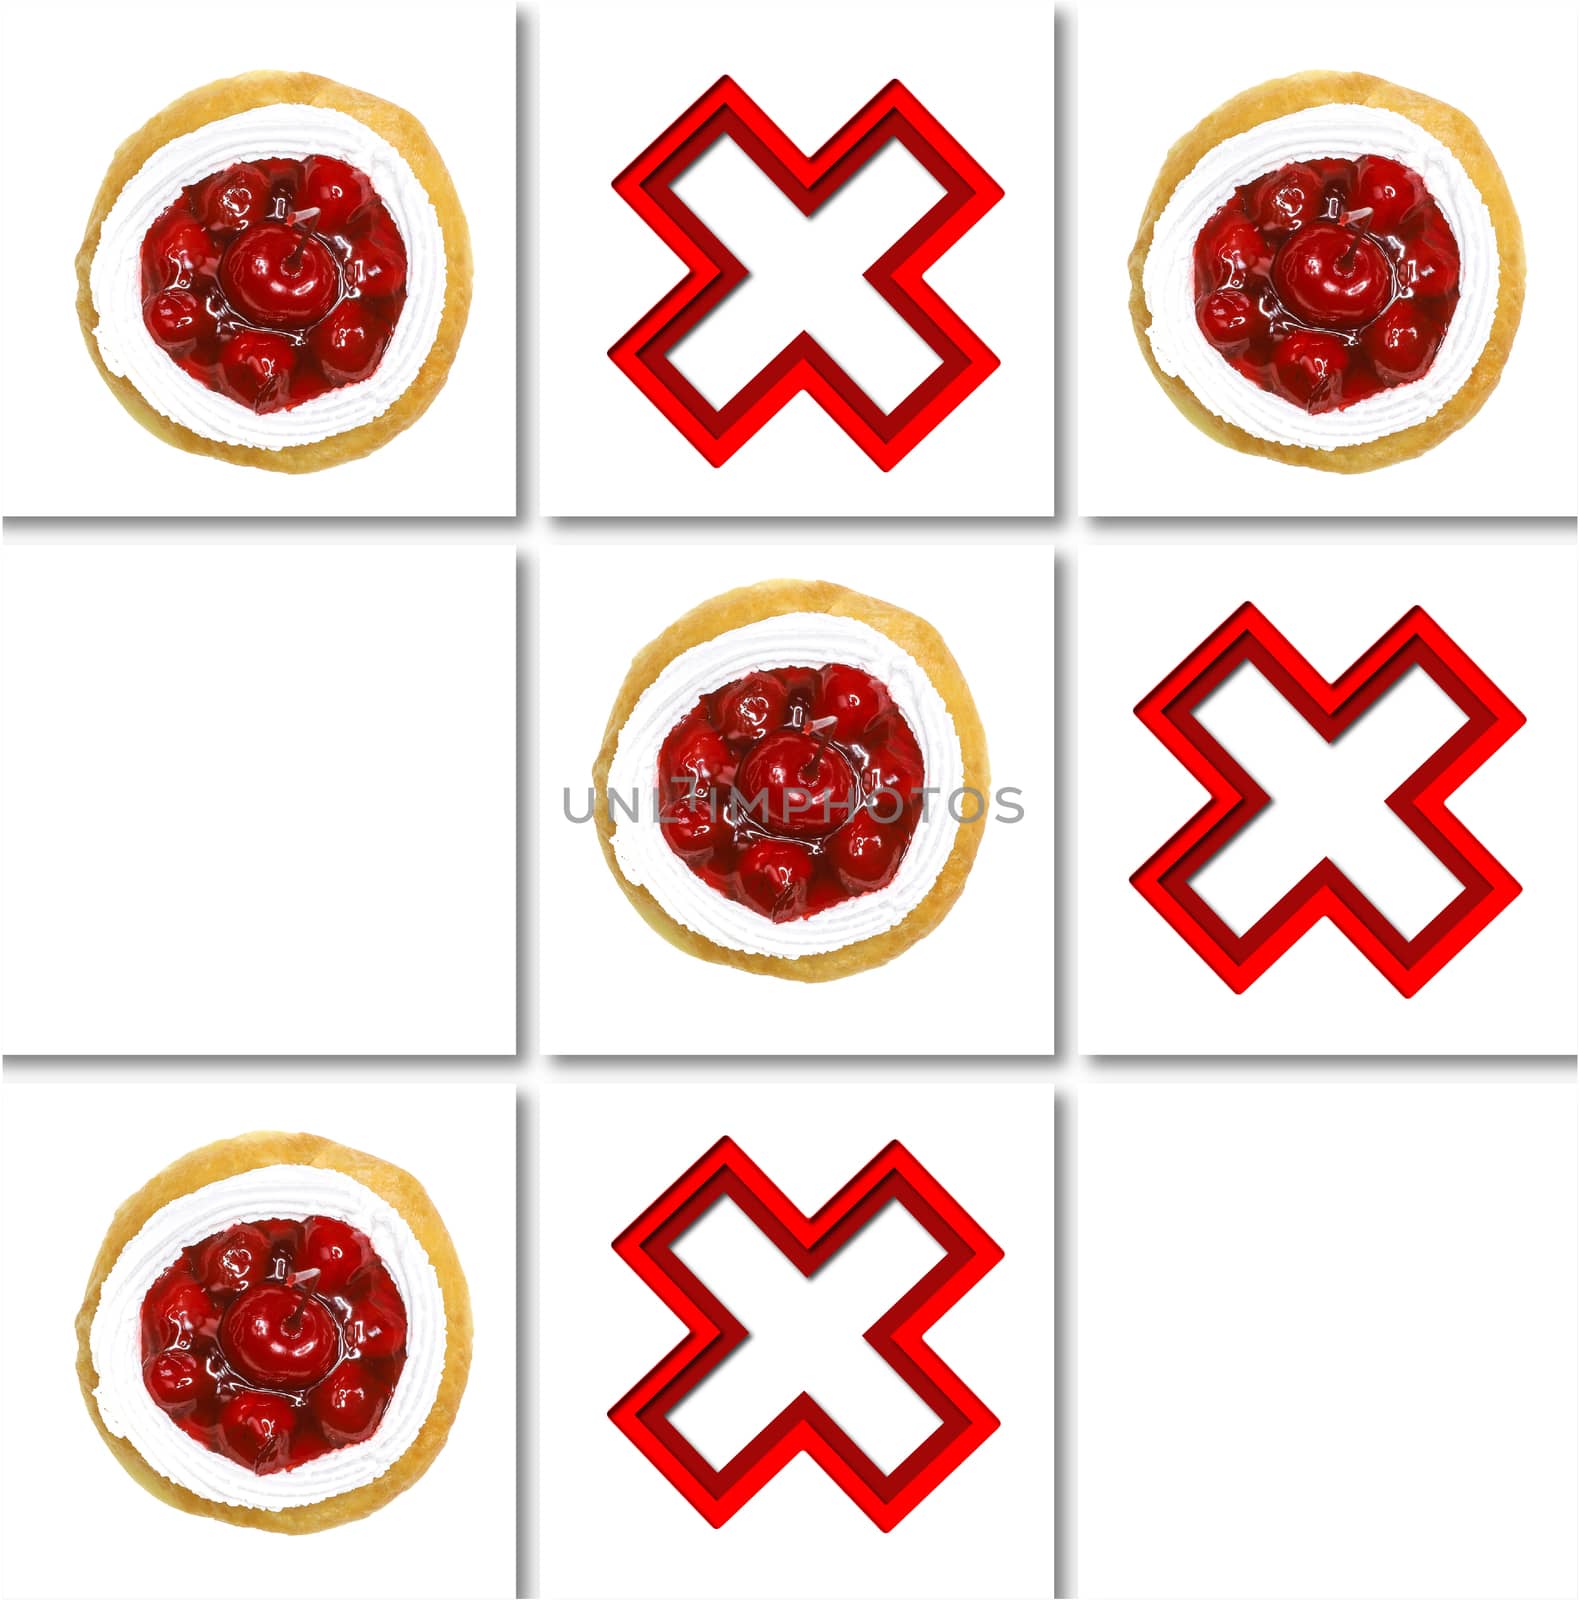 A pattern made of images of layered cross shapes and donut on white tile background. Illustration art concept of food stuff tic tac toe.